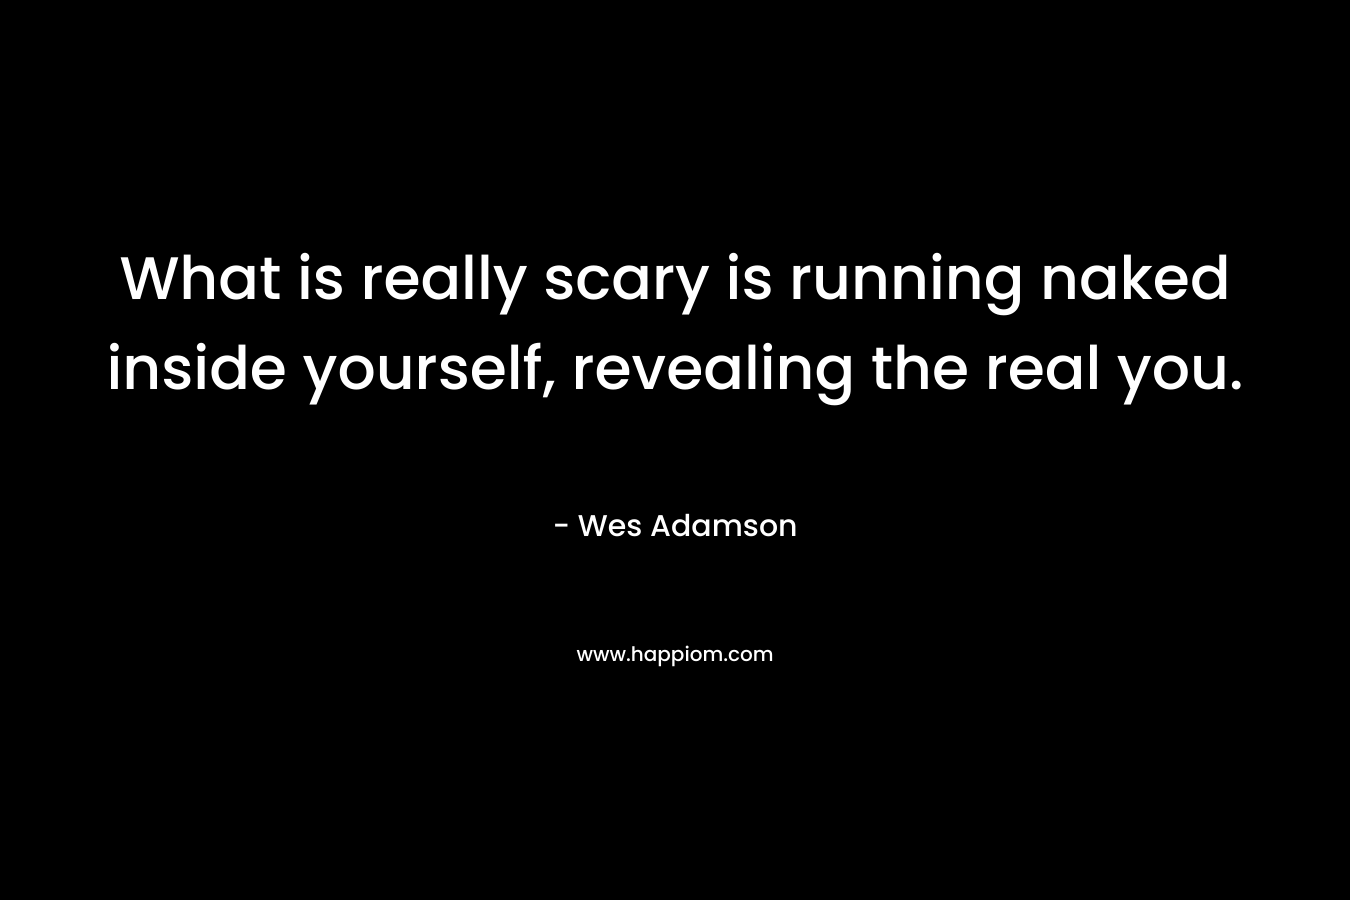 What is really scary is running naked inside yourself, revealing the real you. – Wes Adamson